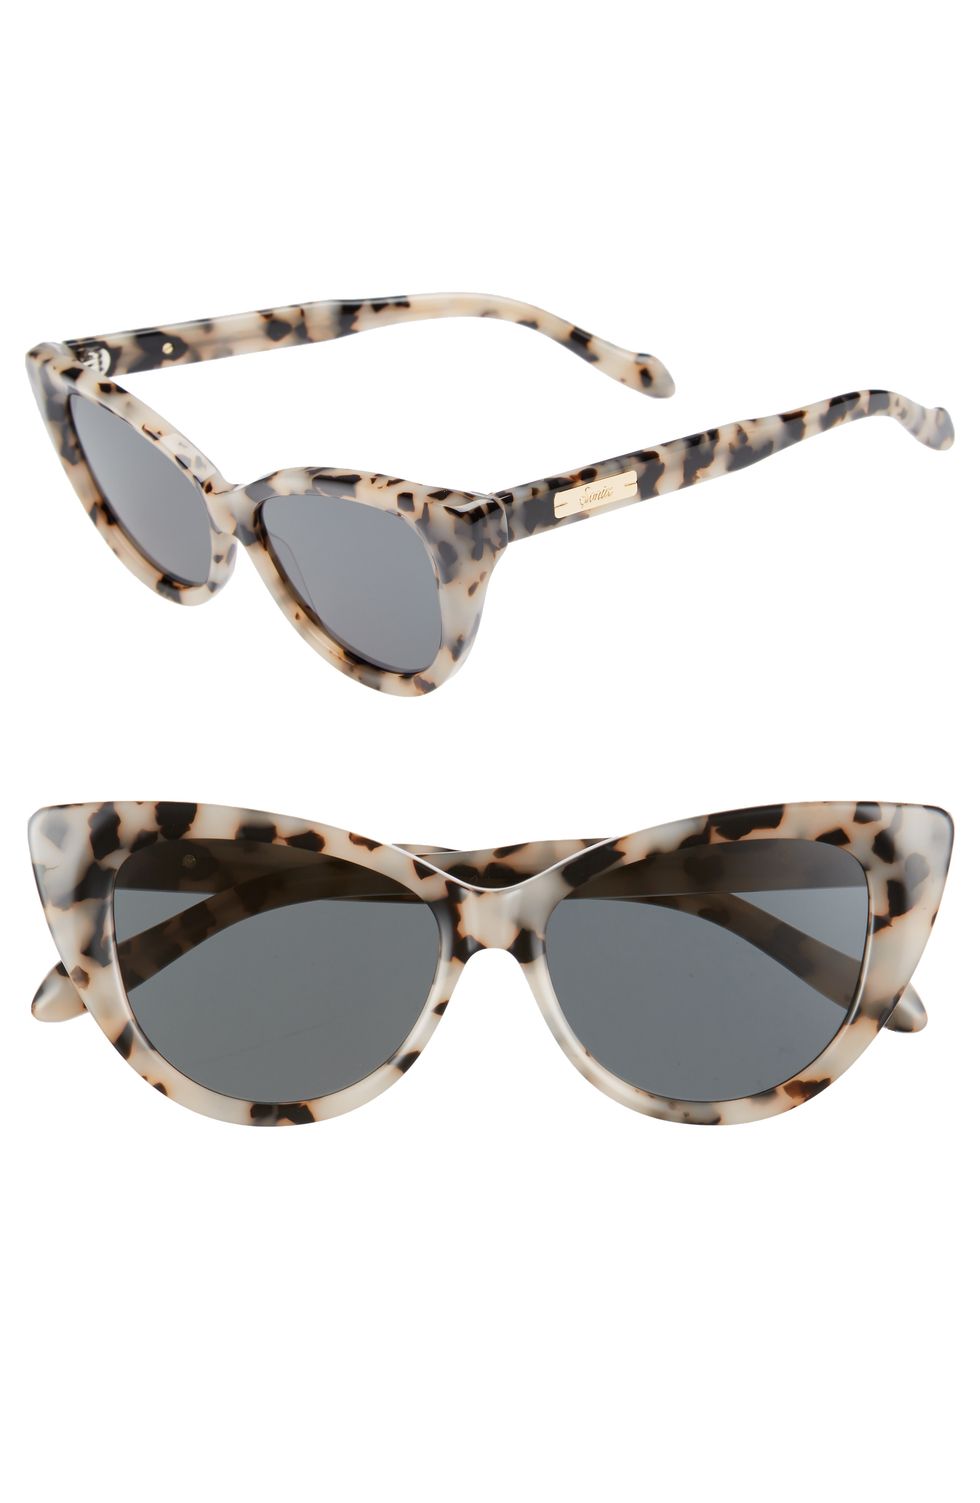 A Pair of Cool Cat-Eye Sunglasses for That Retro Vibe